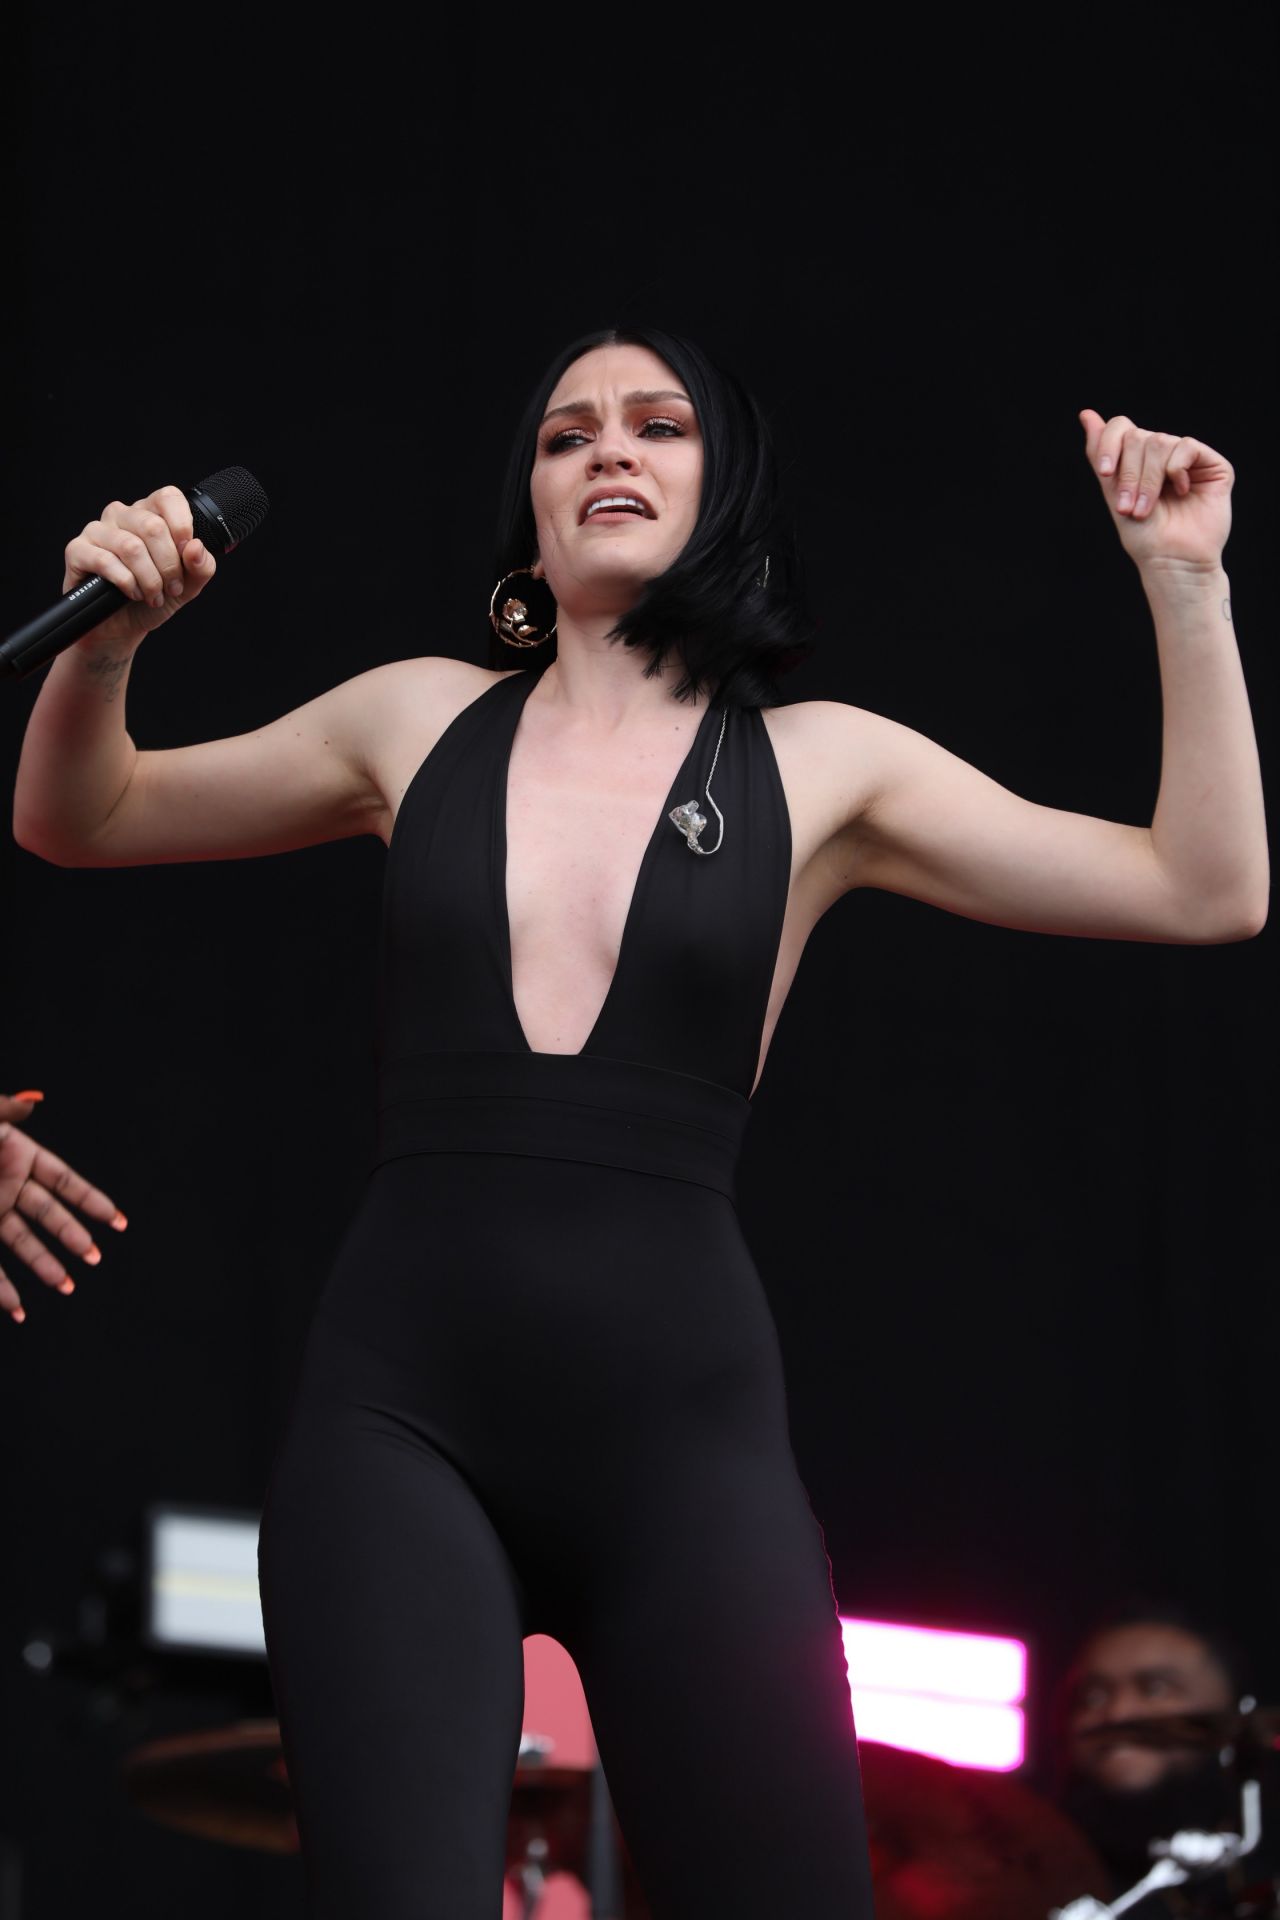 jessie-j-performs-at-the-isle-of-wight-festival-06-23-2018-0.jpg